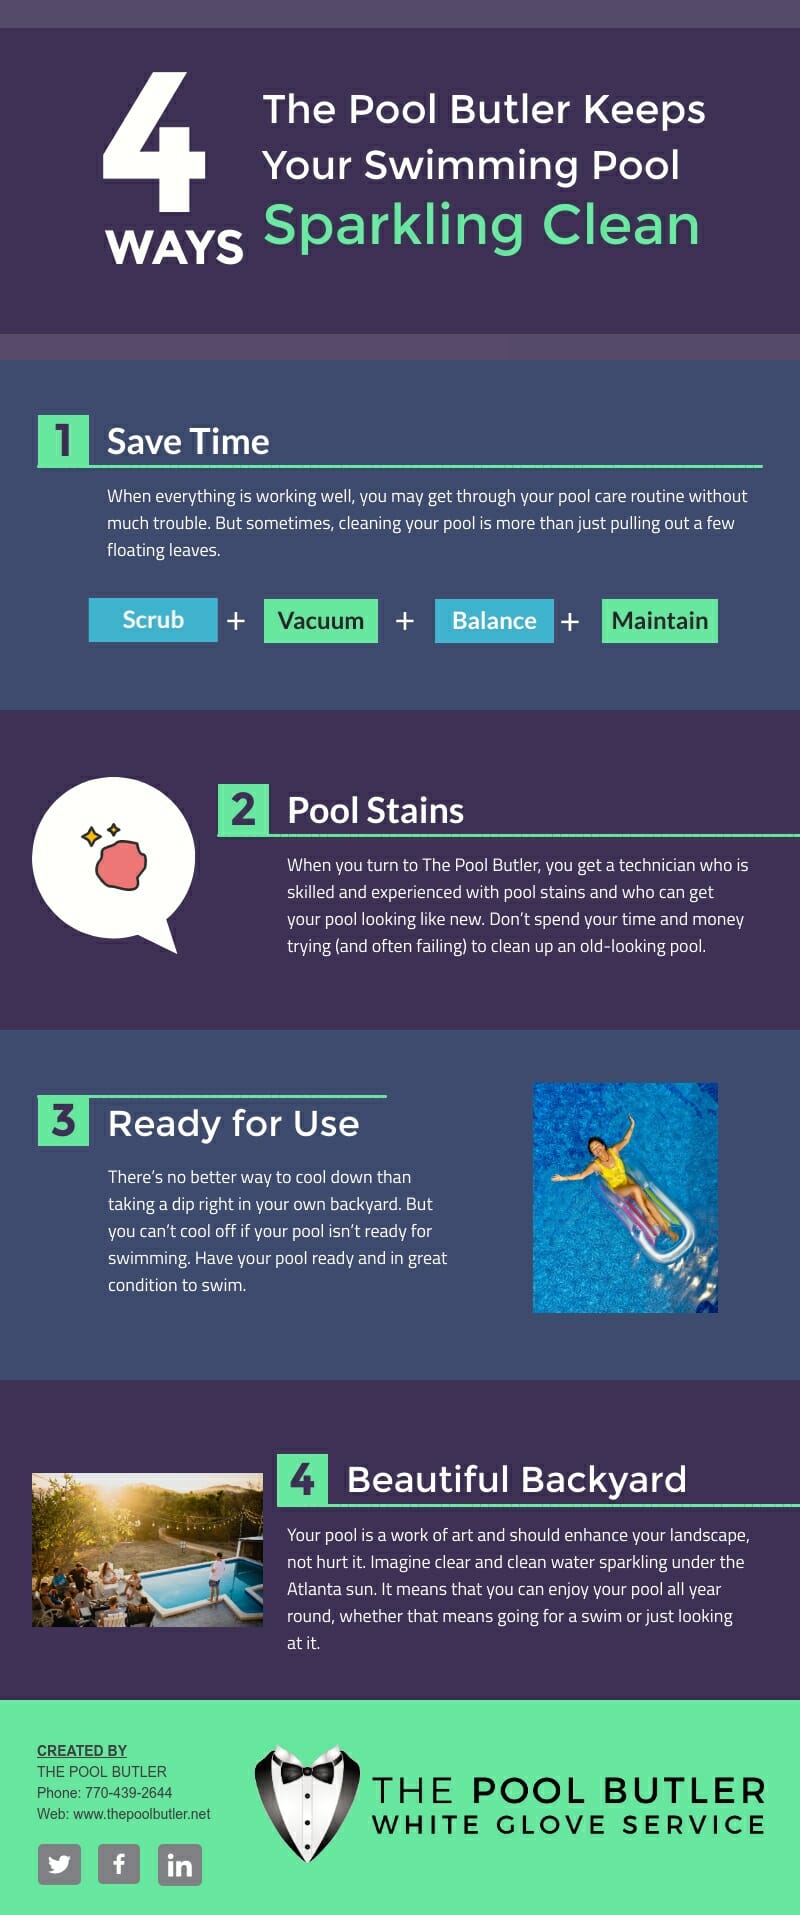 How The Pool Butler Keeps Your Swimming Pool Sparkling [infographic]